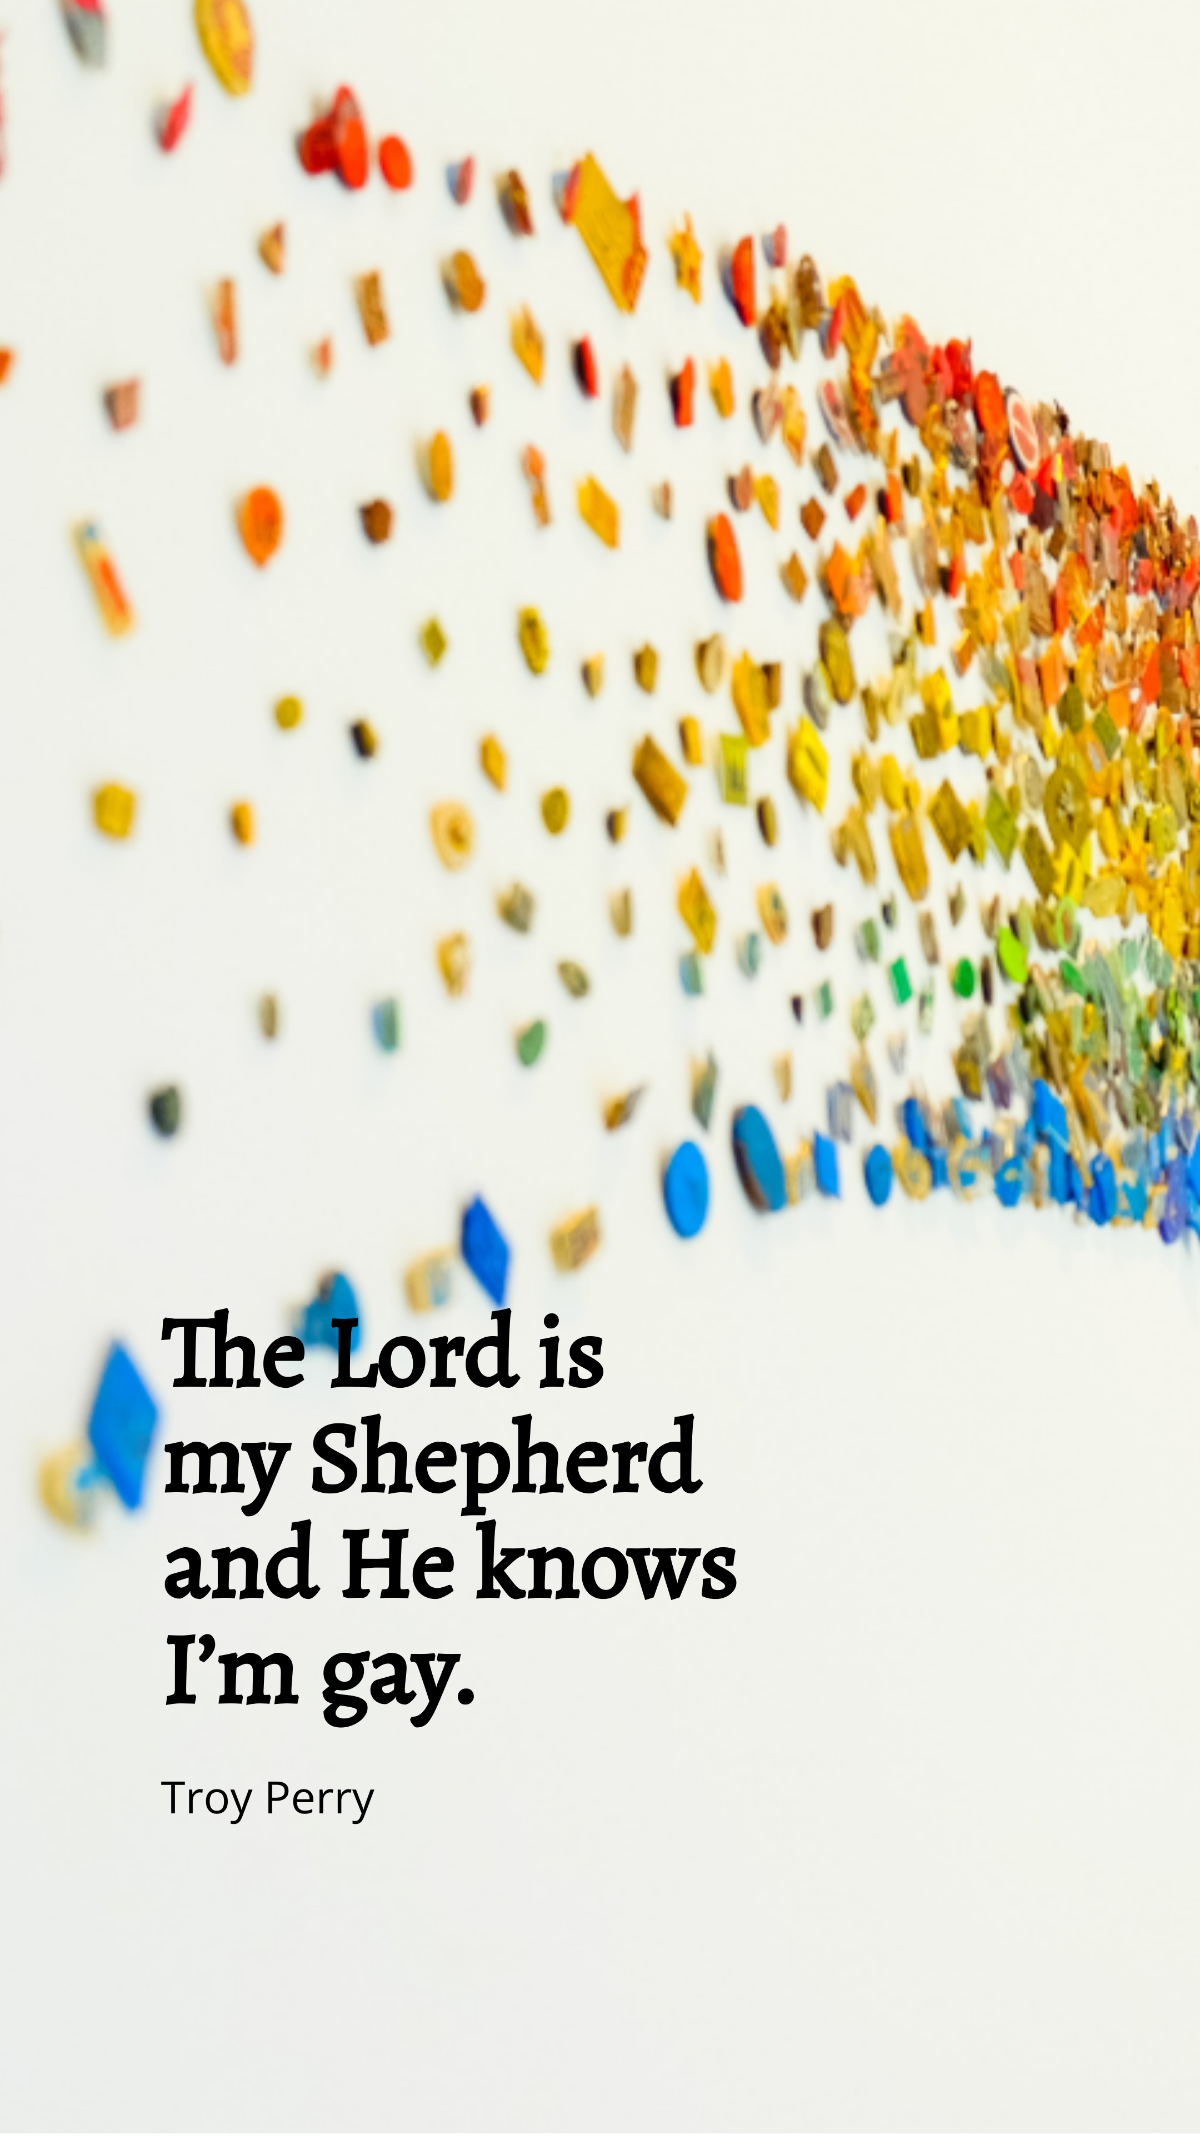 Troy Perry - The Lord is my Shepherd and He knows I’m gay. Template